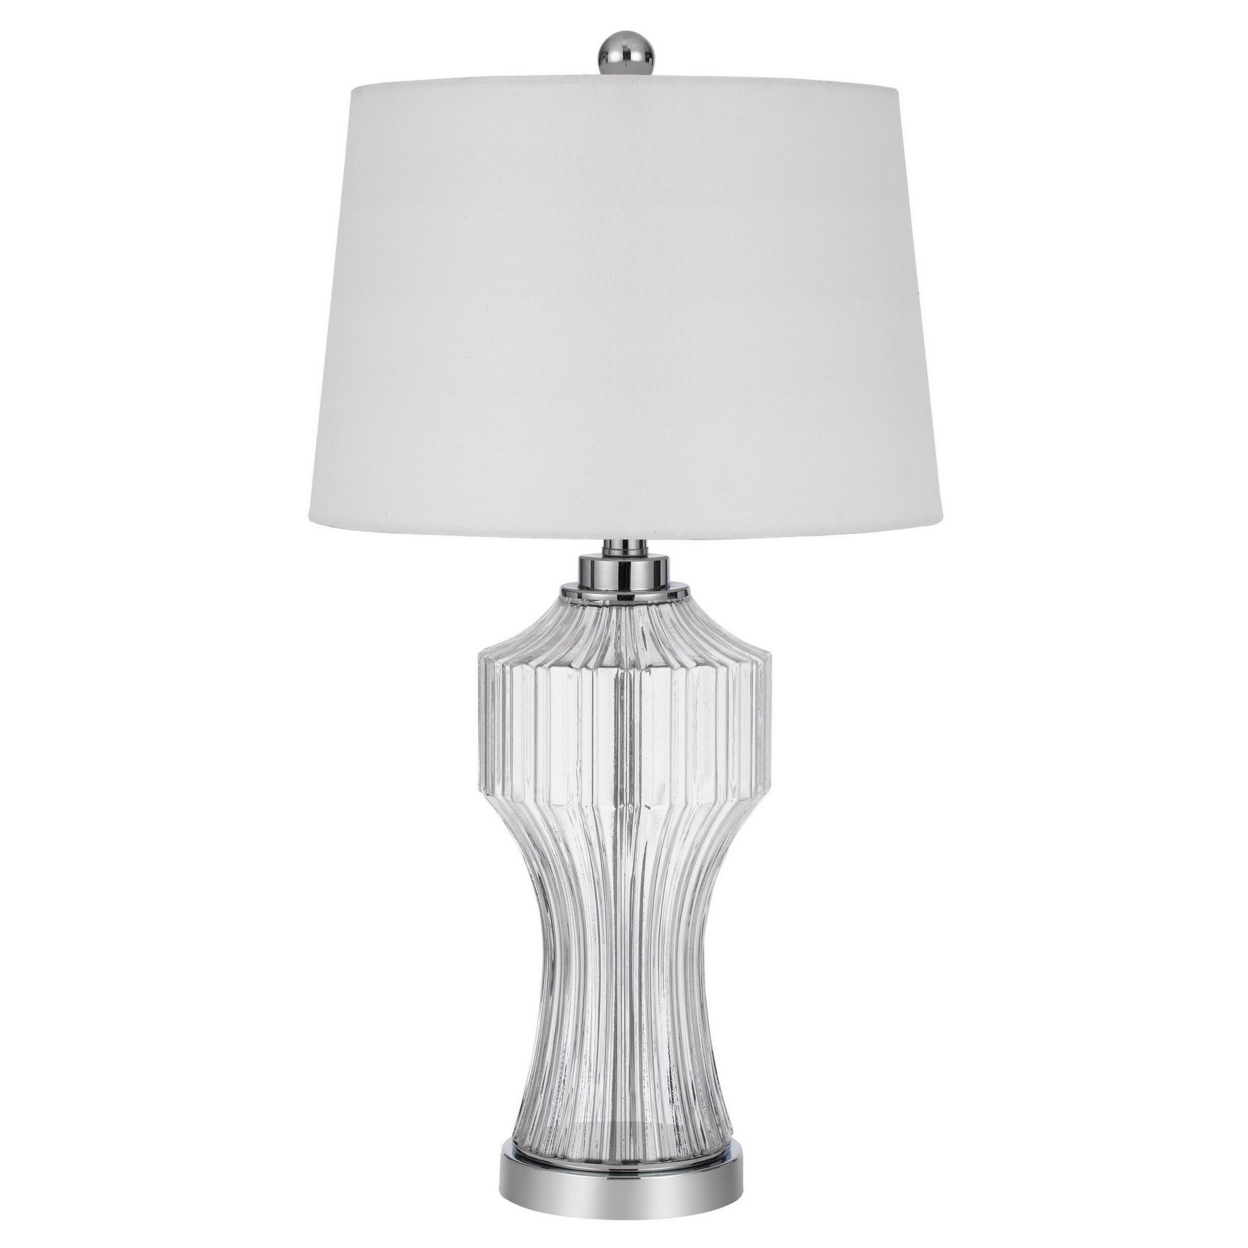 26 Inch Accent Table Lamp, Round Glass Base, White, Clear- Saltoro Sherpi